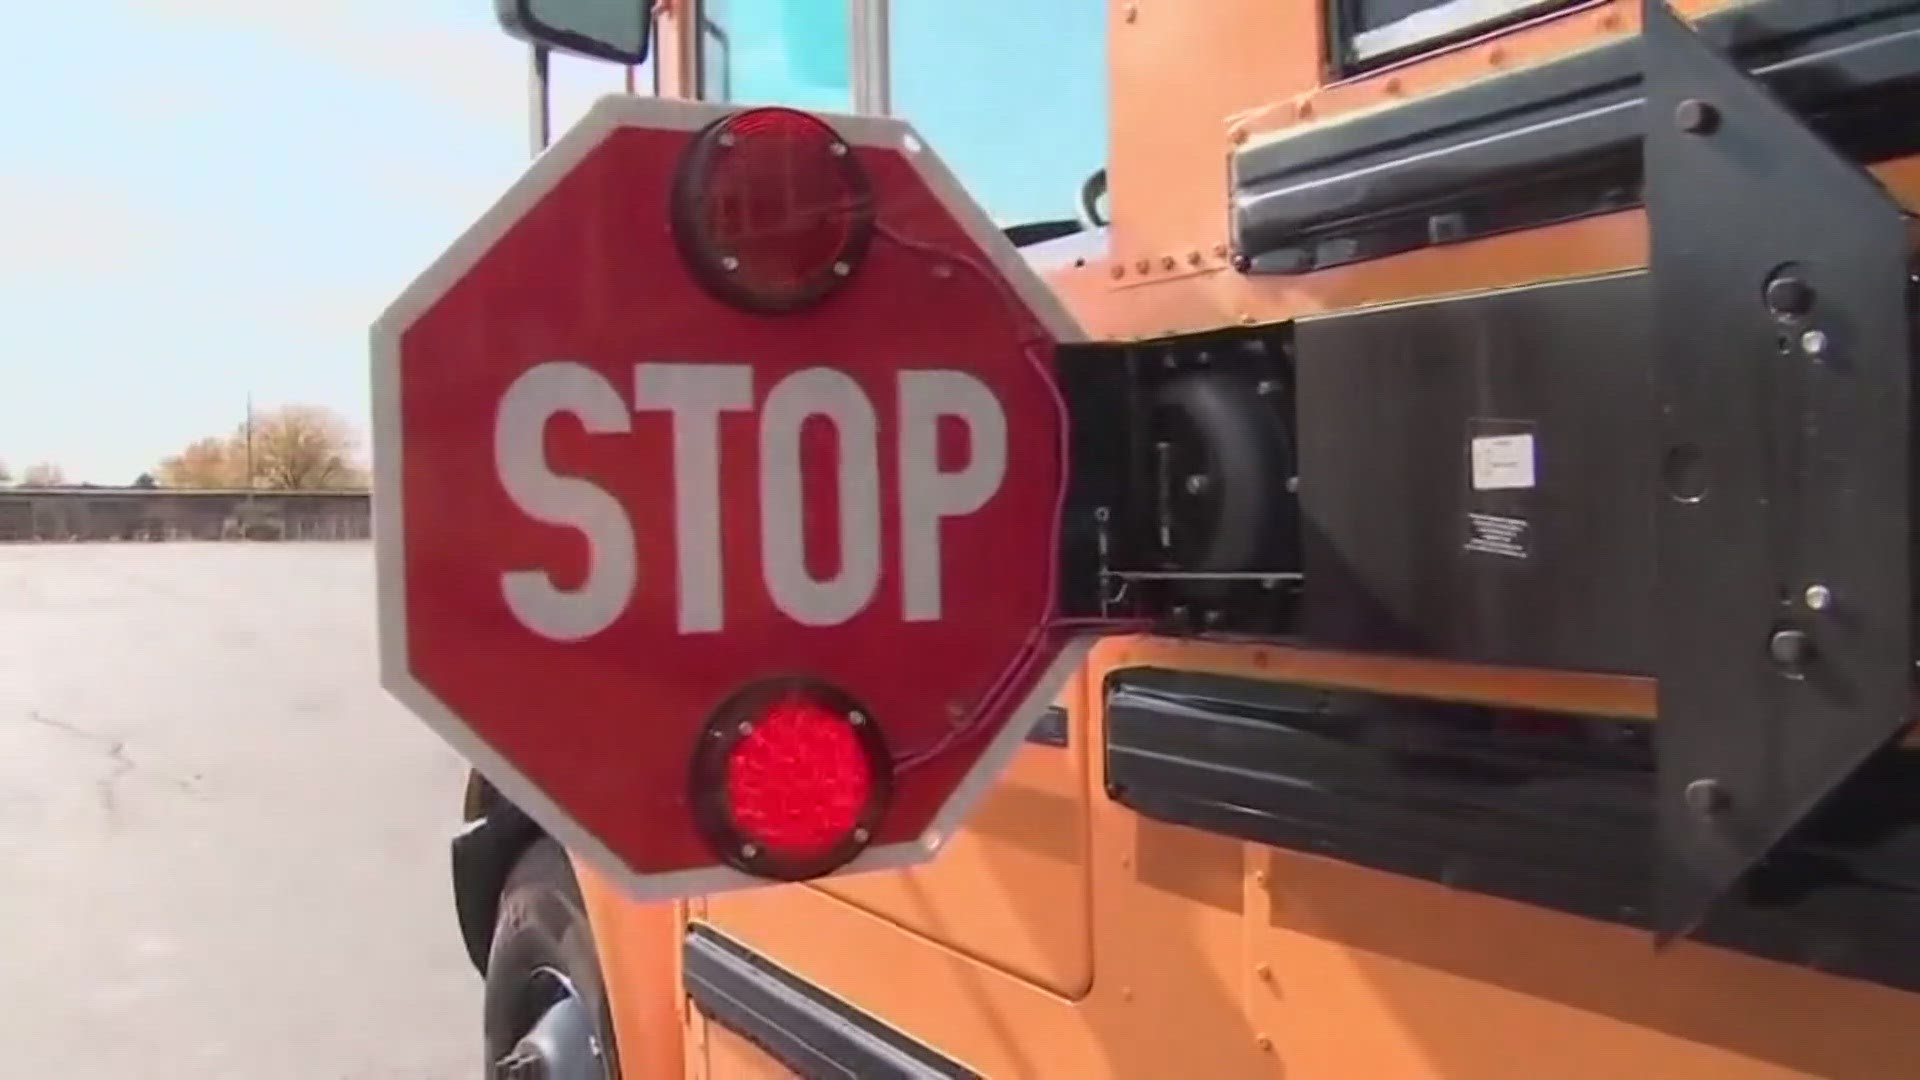 As more students head to school, Ohio drivers should note what kind of roadway they are sharing with school bus drivers.